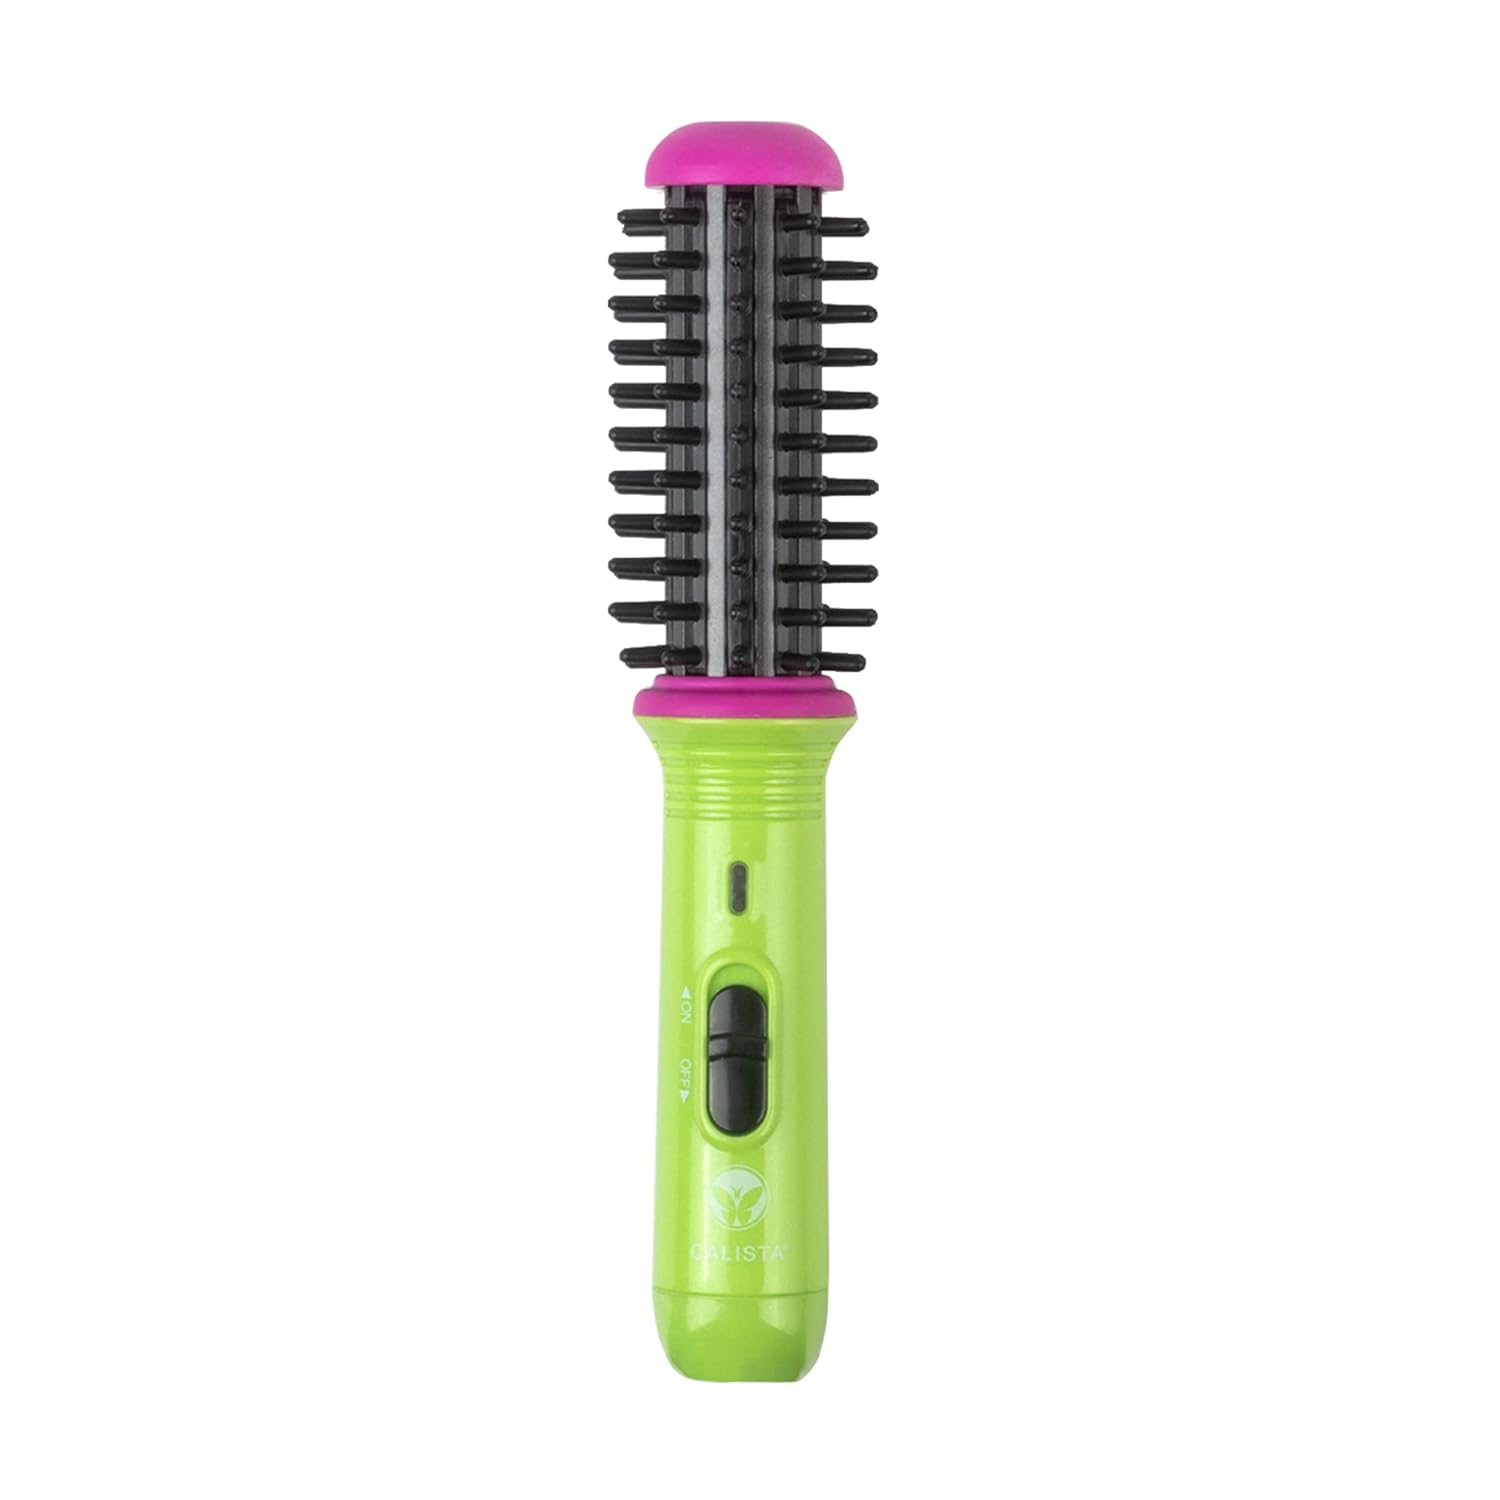 Calista GoGo Mini Round Brush, Compact Touch-Up Styling Tool (Watermelon Pop)